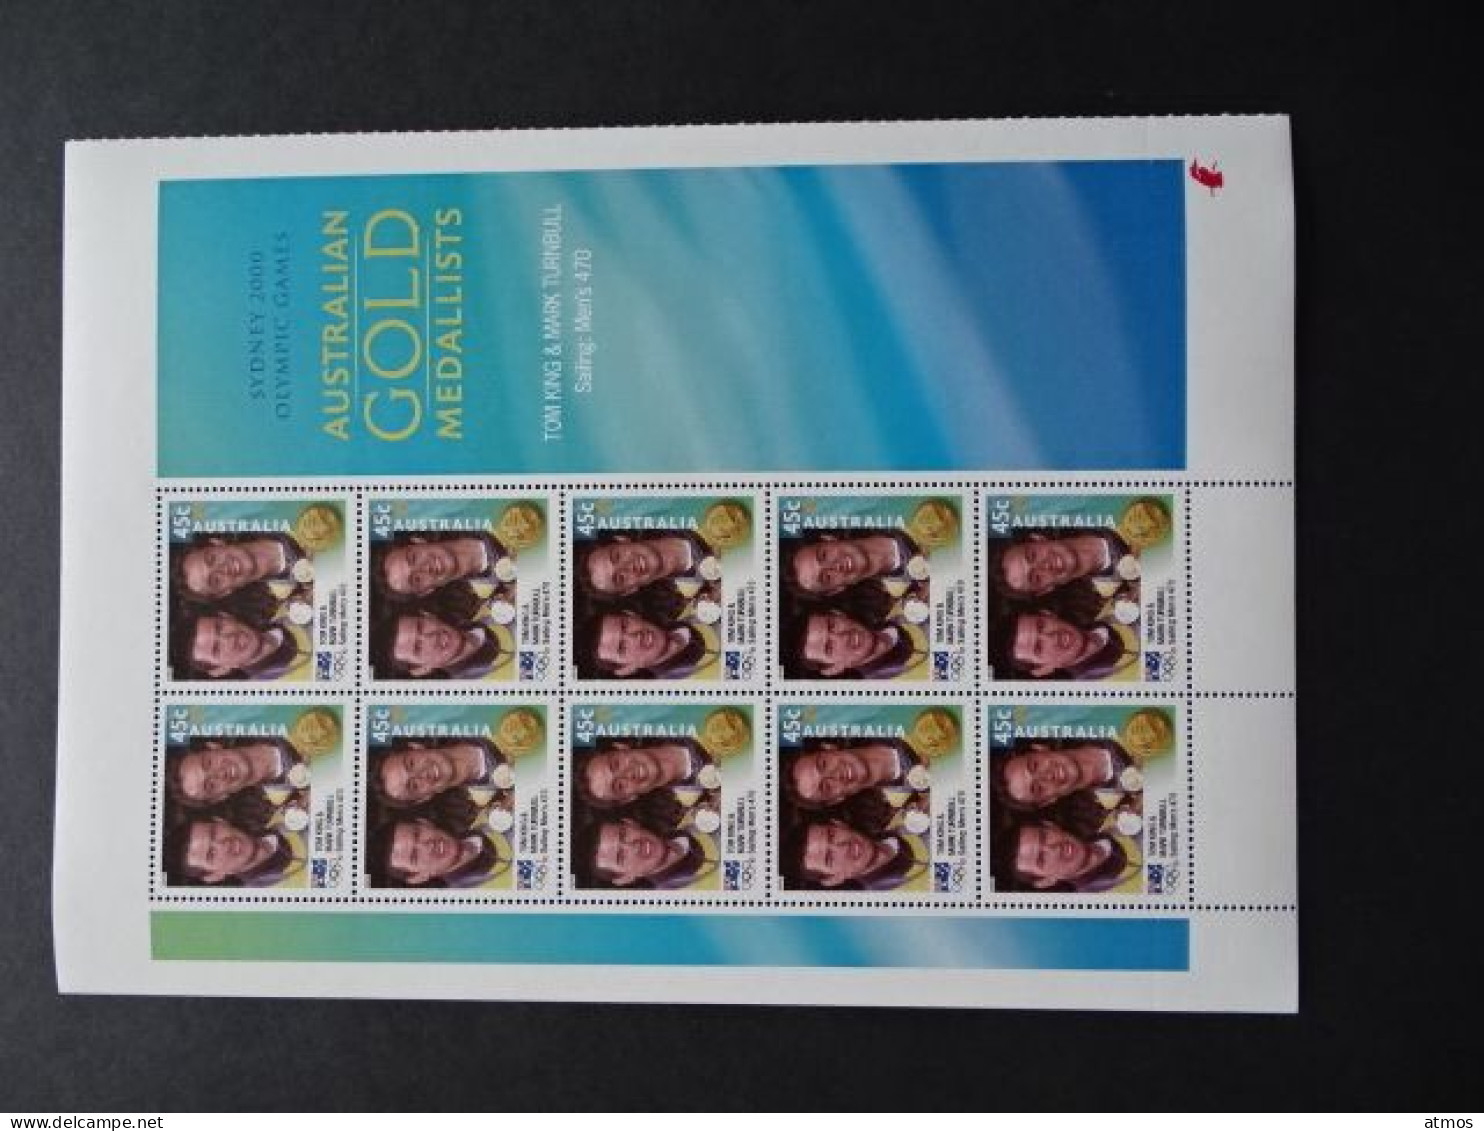 Australia MNH Michel Nr 1988 Sheet Of 10 From 2000 ACT - Neufs